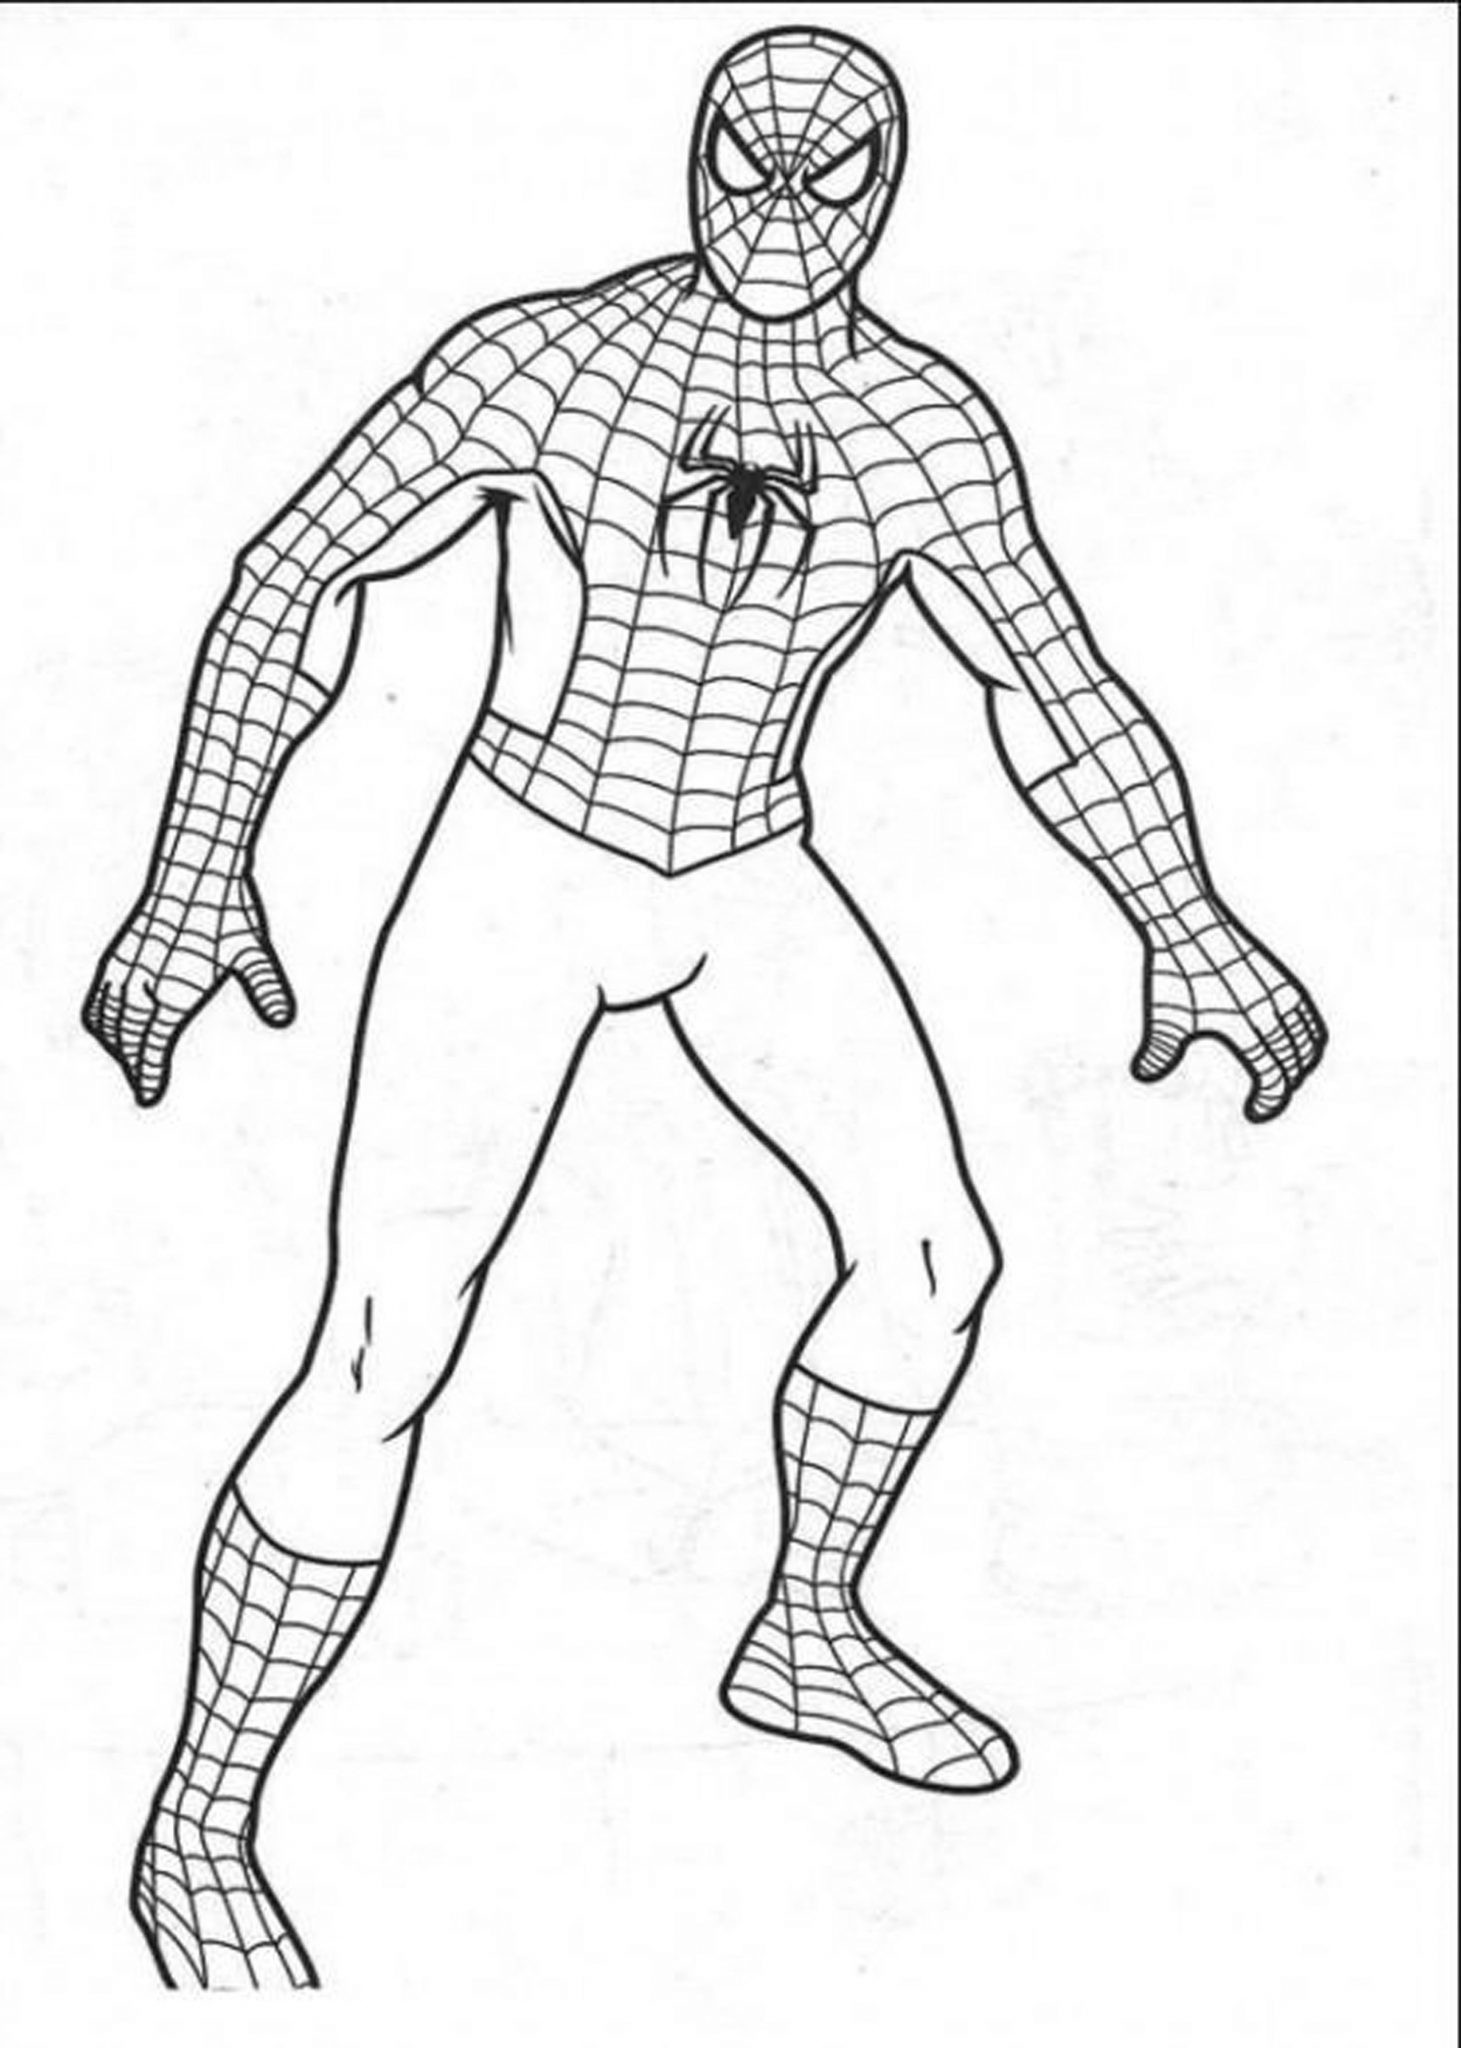 Coloring Sheets For Boys Age 5
 Coloring Pages for Boys & Training Shopping For Children